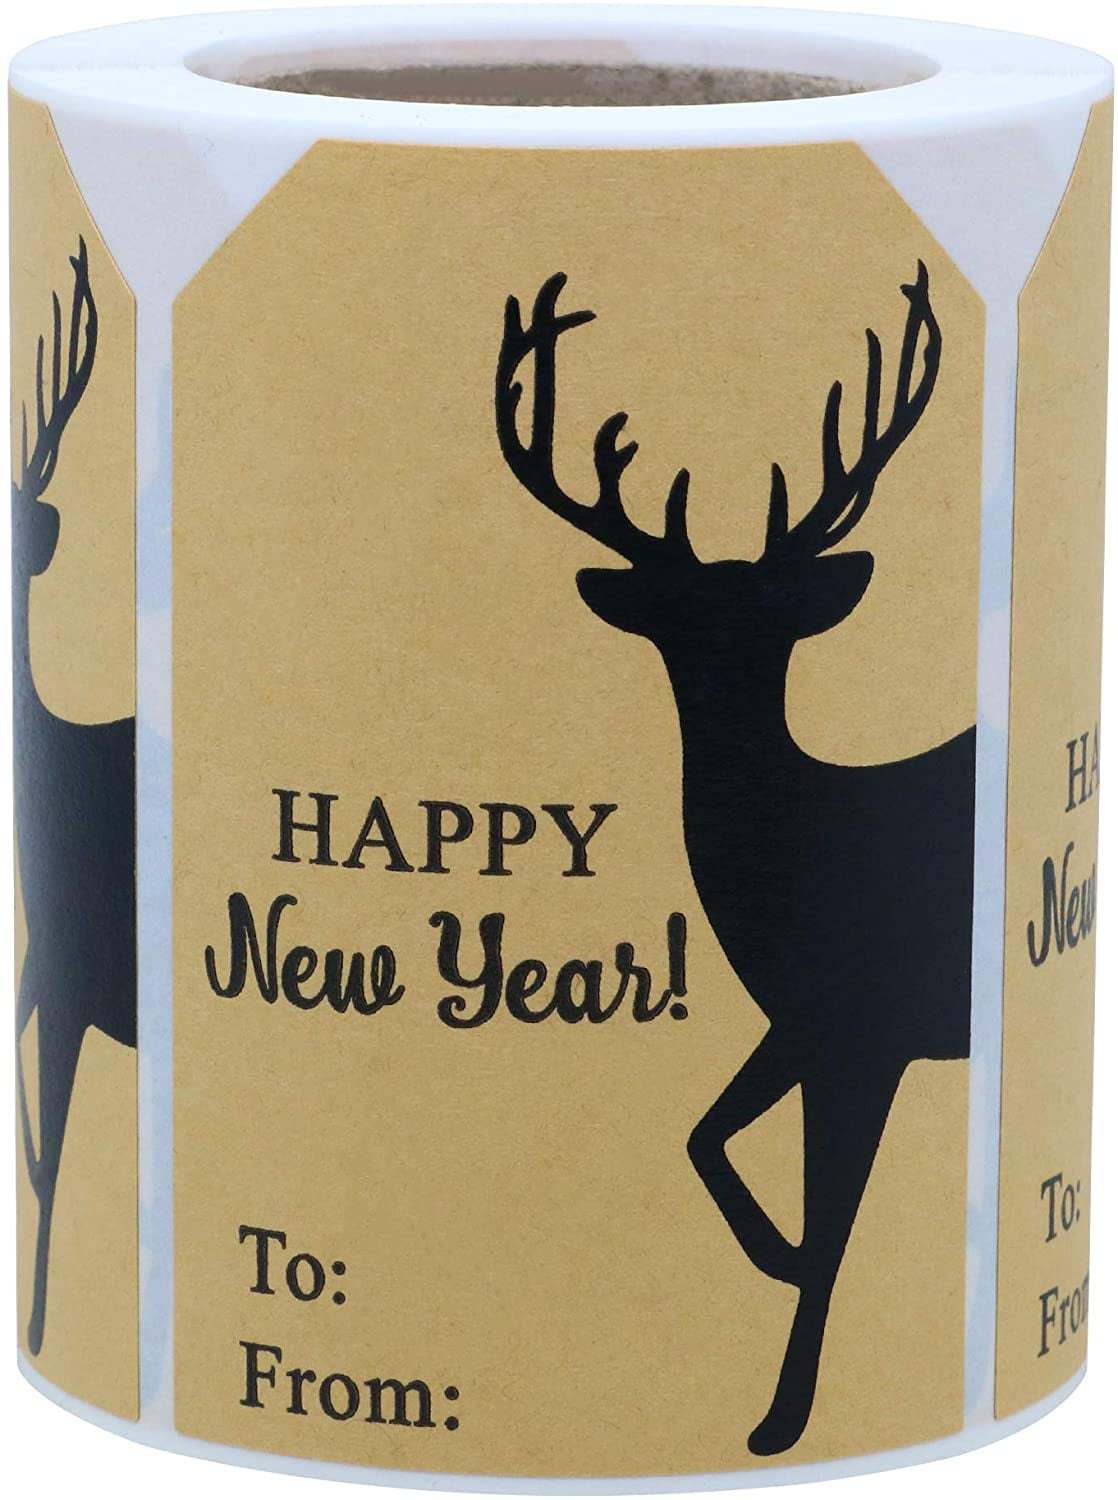 Hybsk 2” x 3” Kraft Paper Happy New Year with Elk Stickers Santa Claus Christmas 200 Total Labels